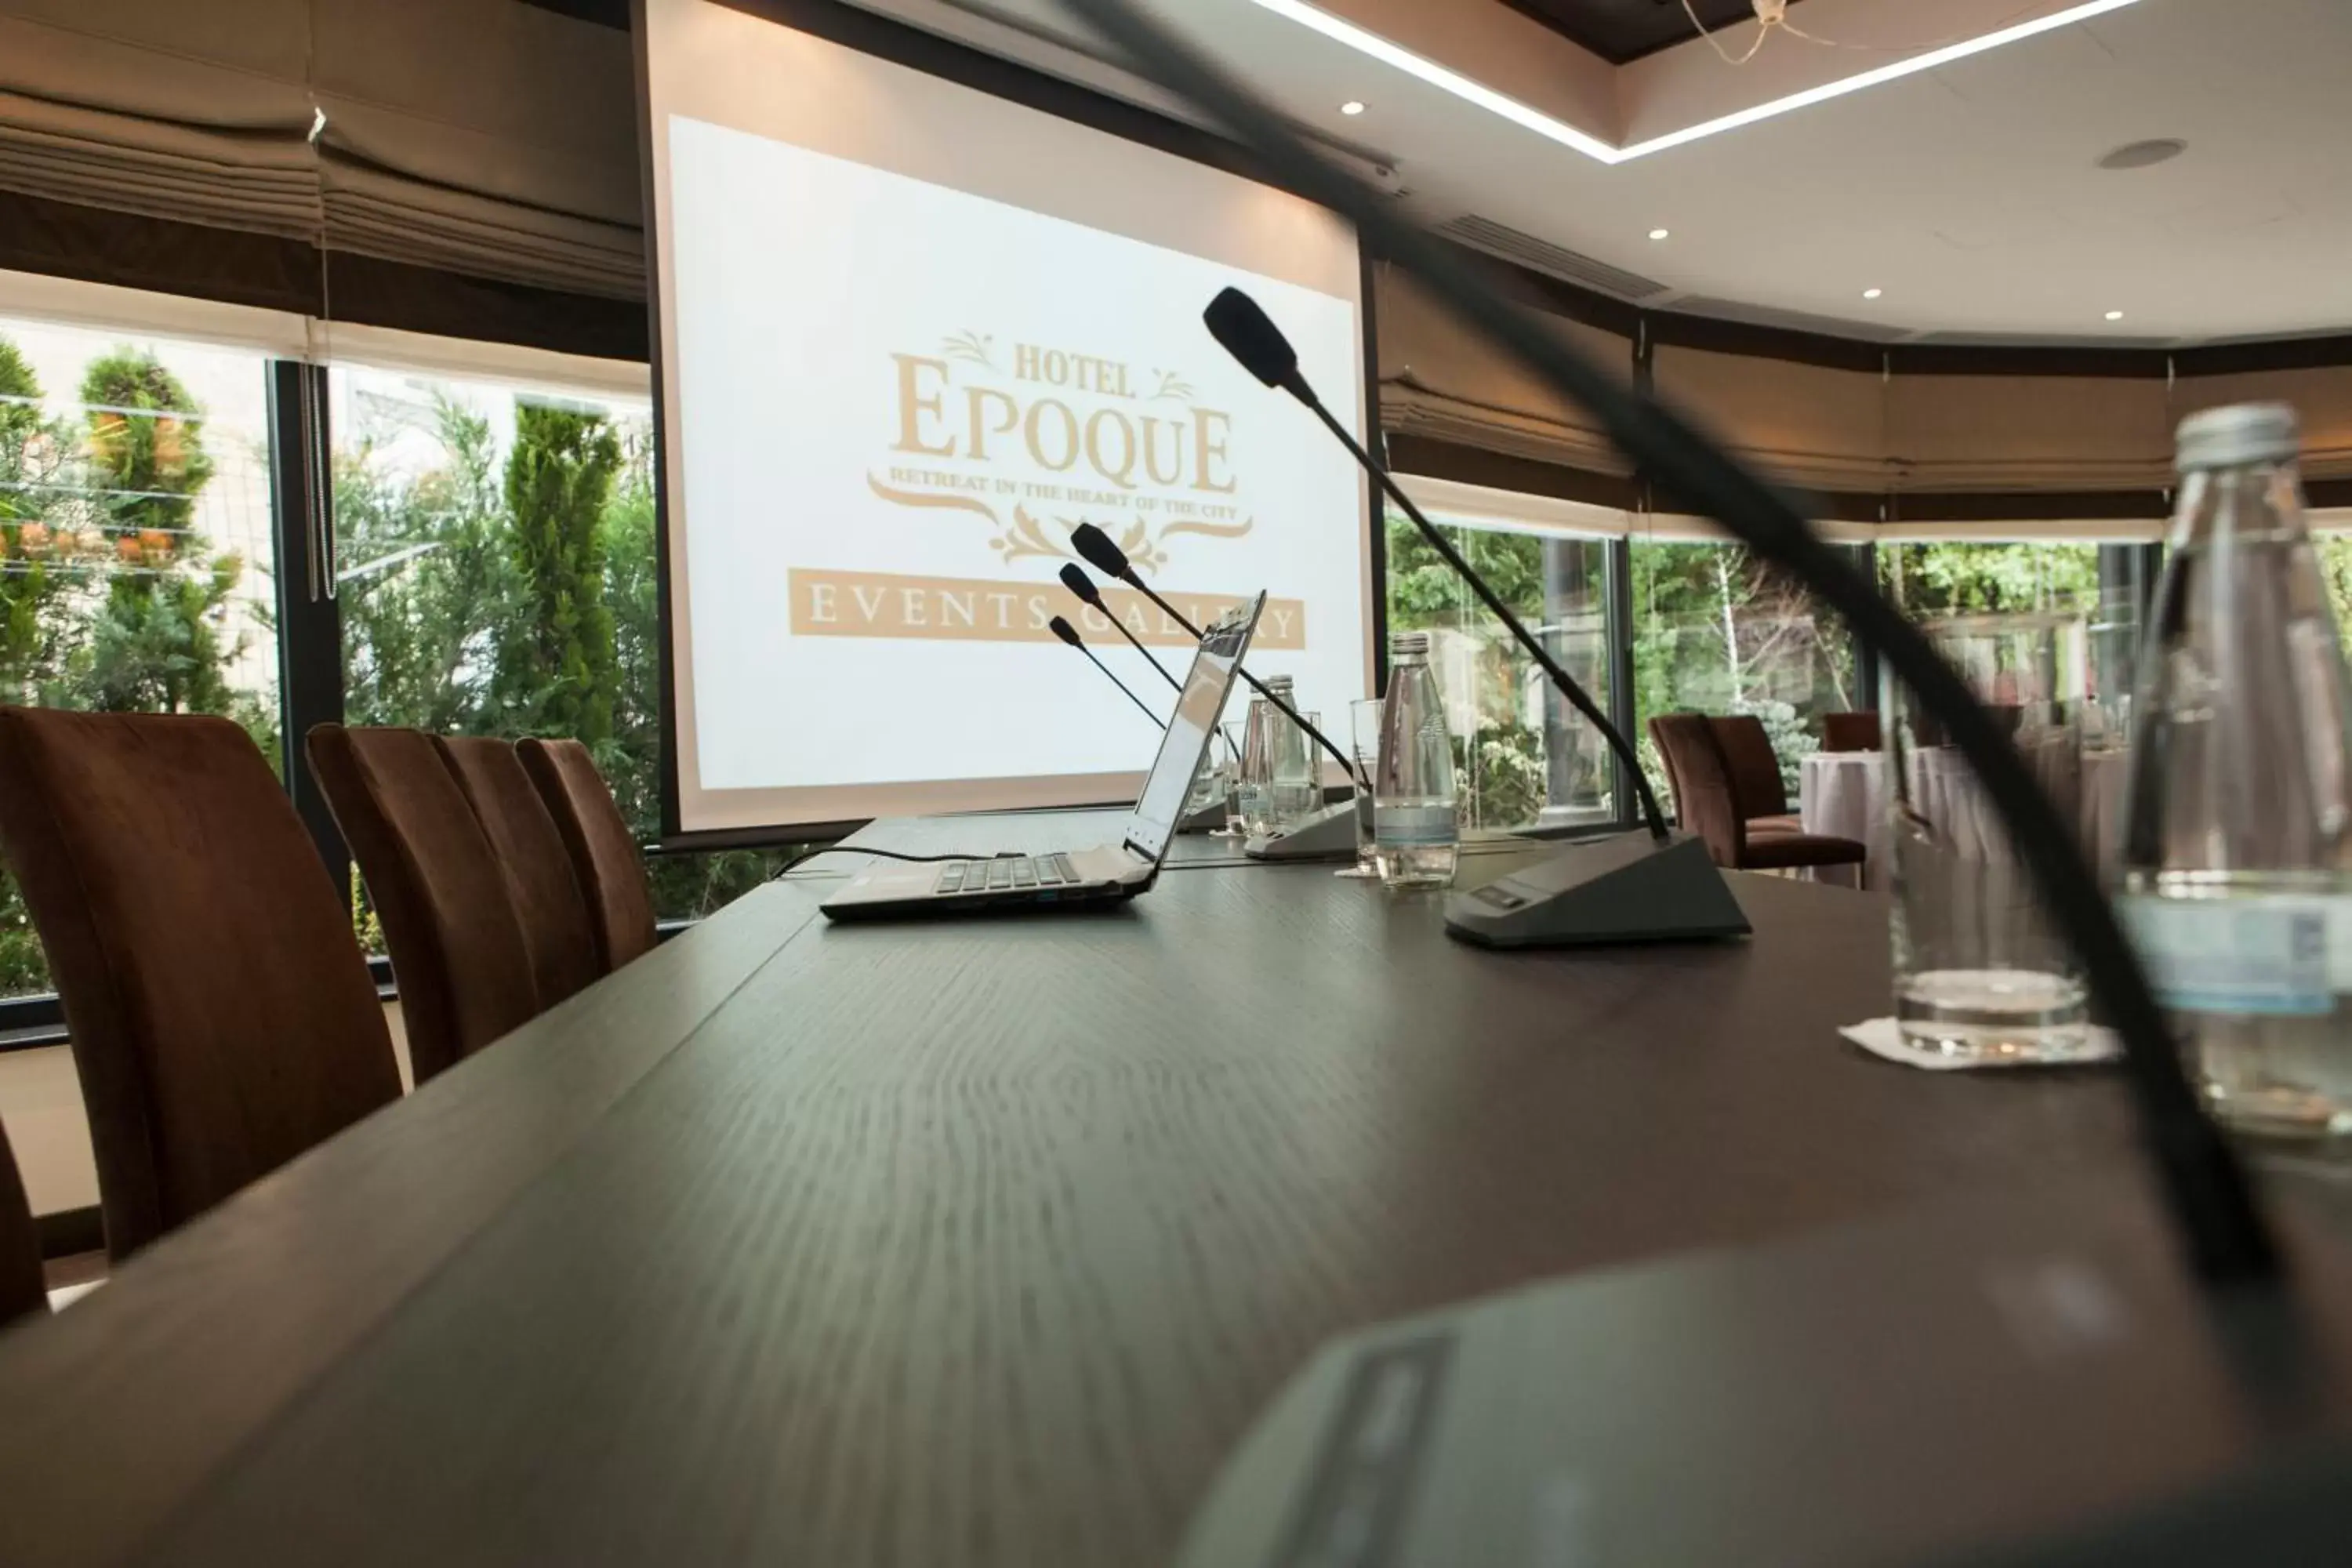 Business facilities in Epoque Hotel - Relais & Chateaux